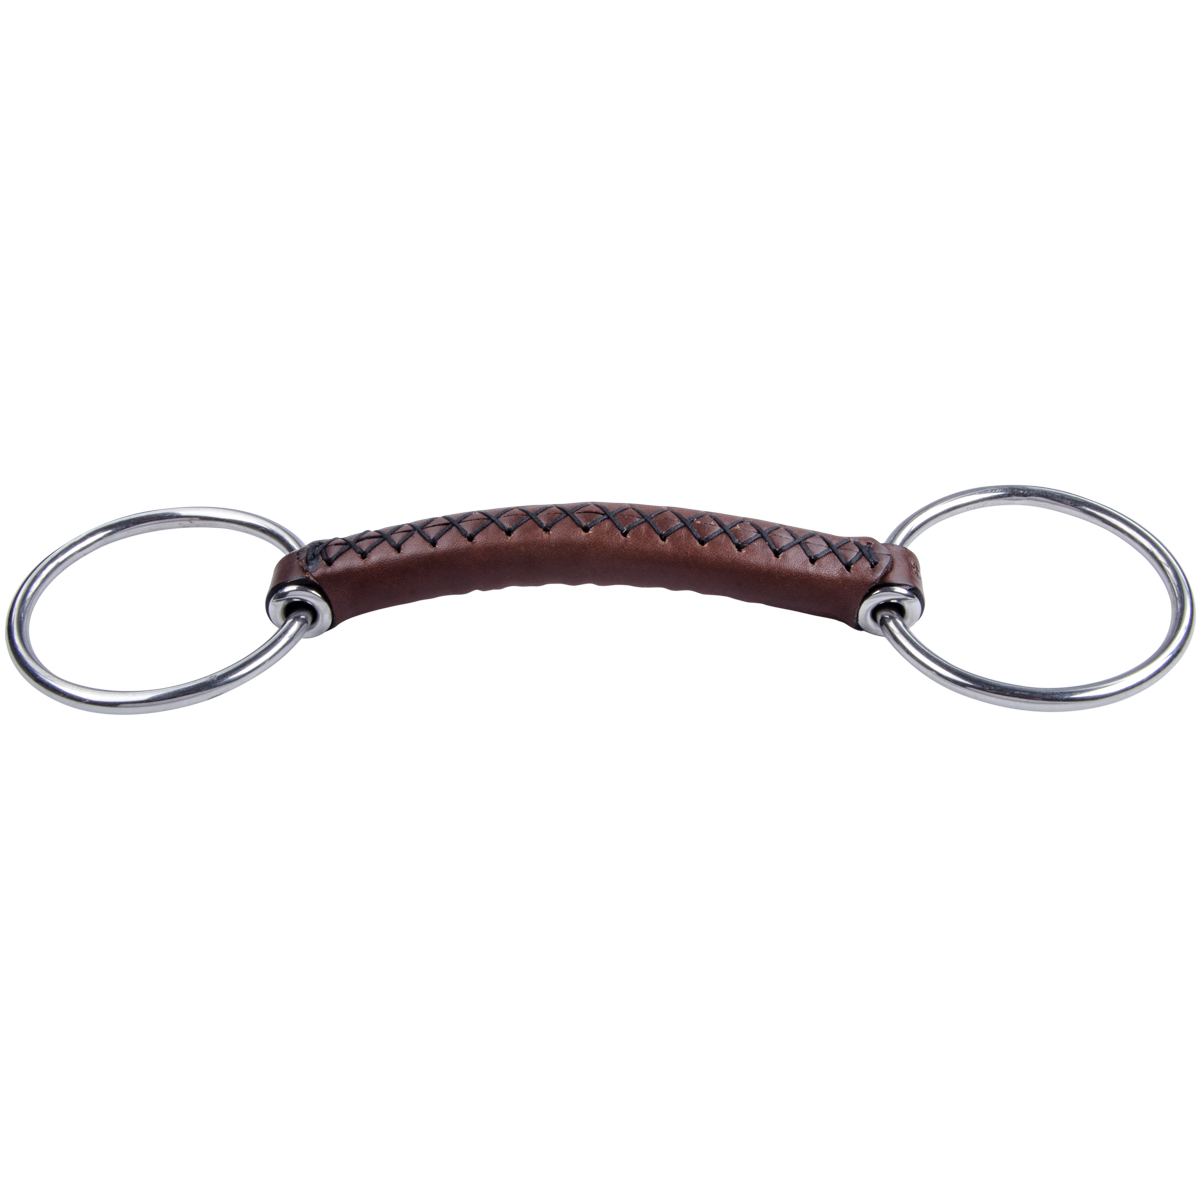 Watertrens Trust Leather Straight, 13,5 cm